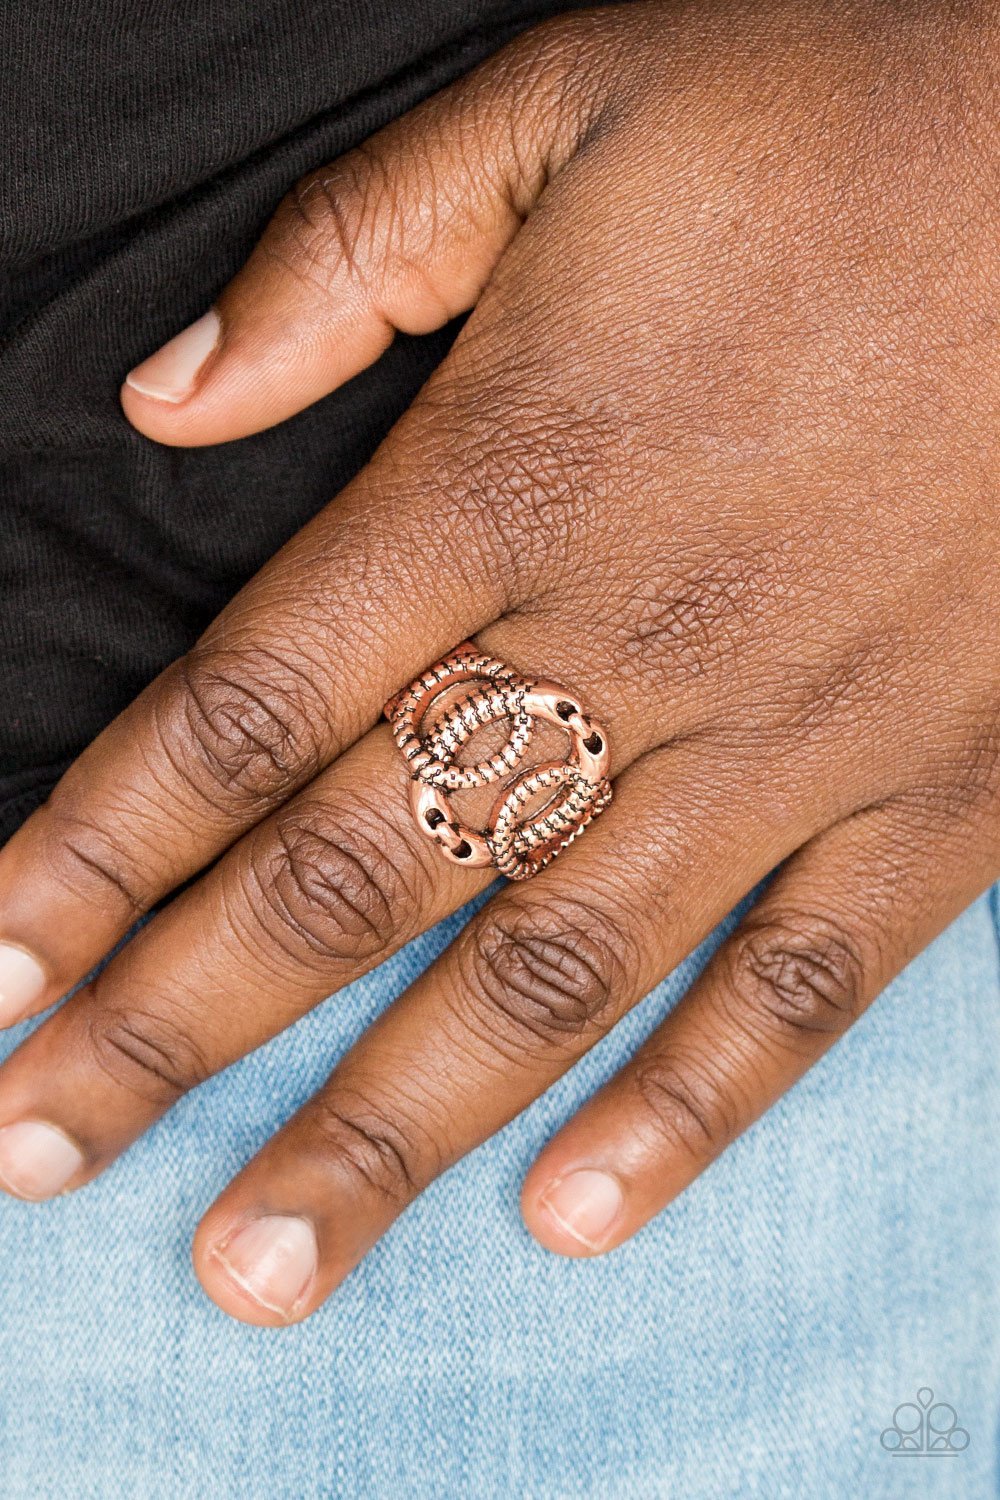 TRIO de Janeiro - Copper Fashion Ring - Paparazzi Accessories - Unique copper fashion ring etched in edgy asymmetrical textures, three glistening copper rings link across the finger, creating a bold industrial centerpiece. Bejeweled Accessories By Kristie - Trendy fashion jewelry for everyone -